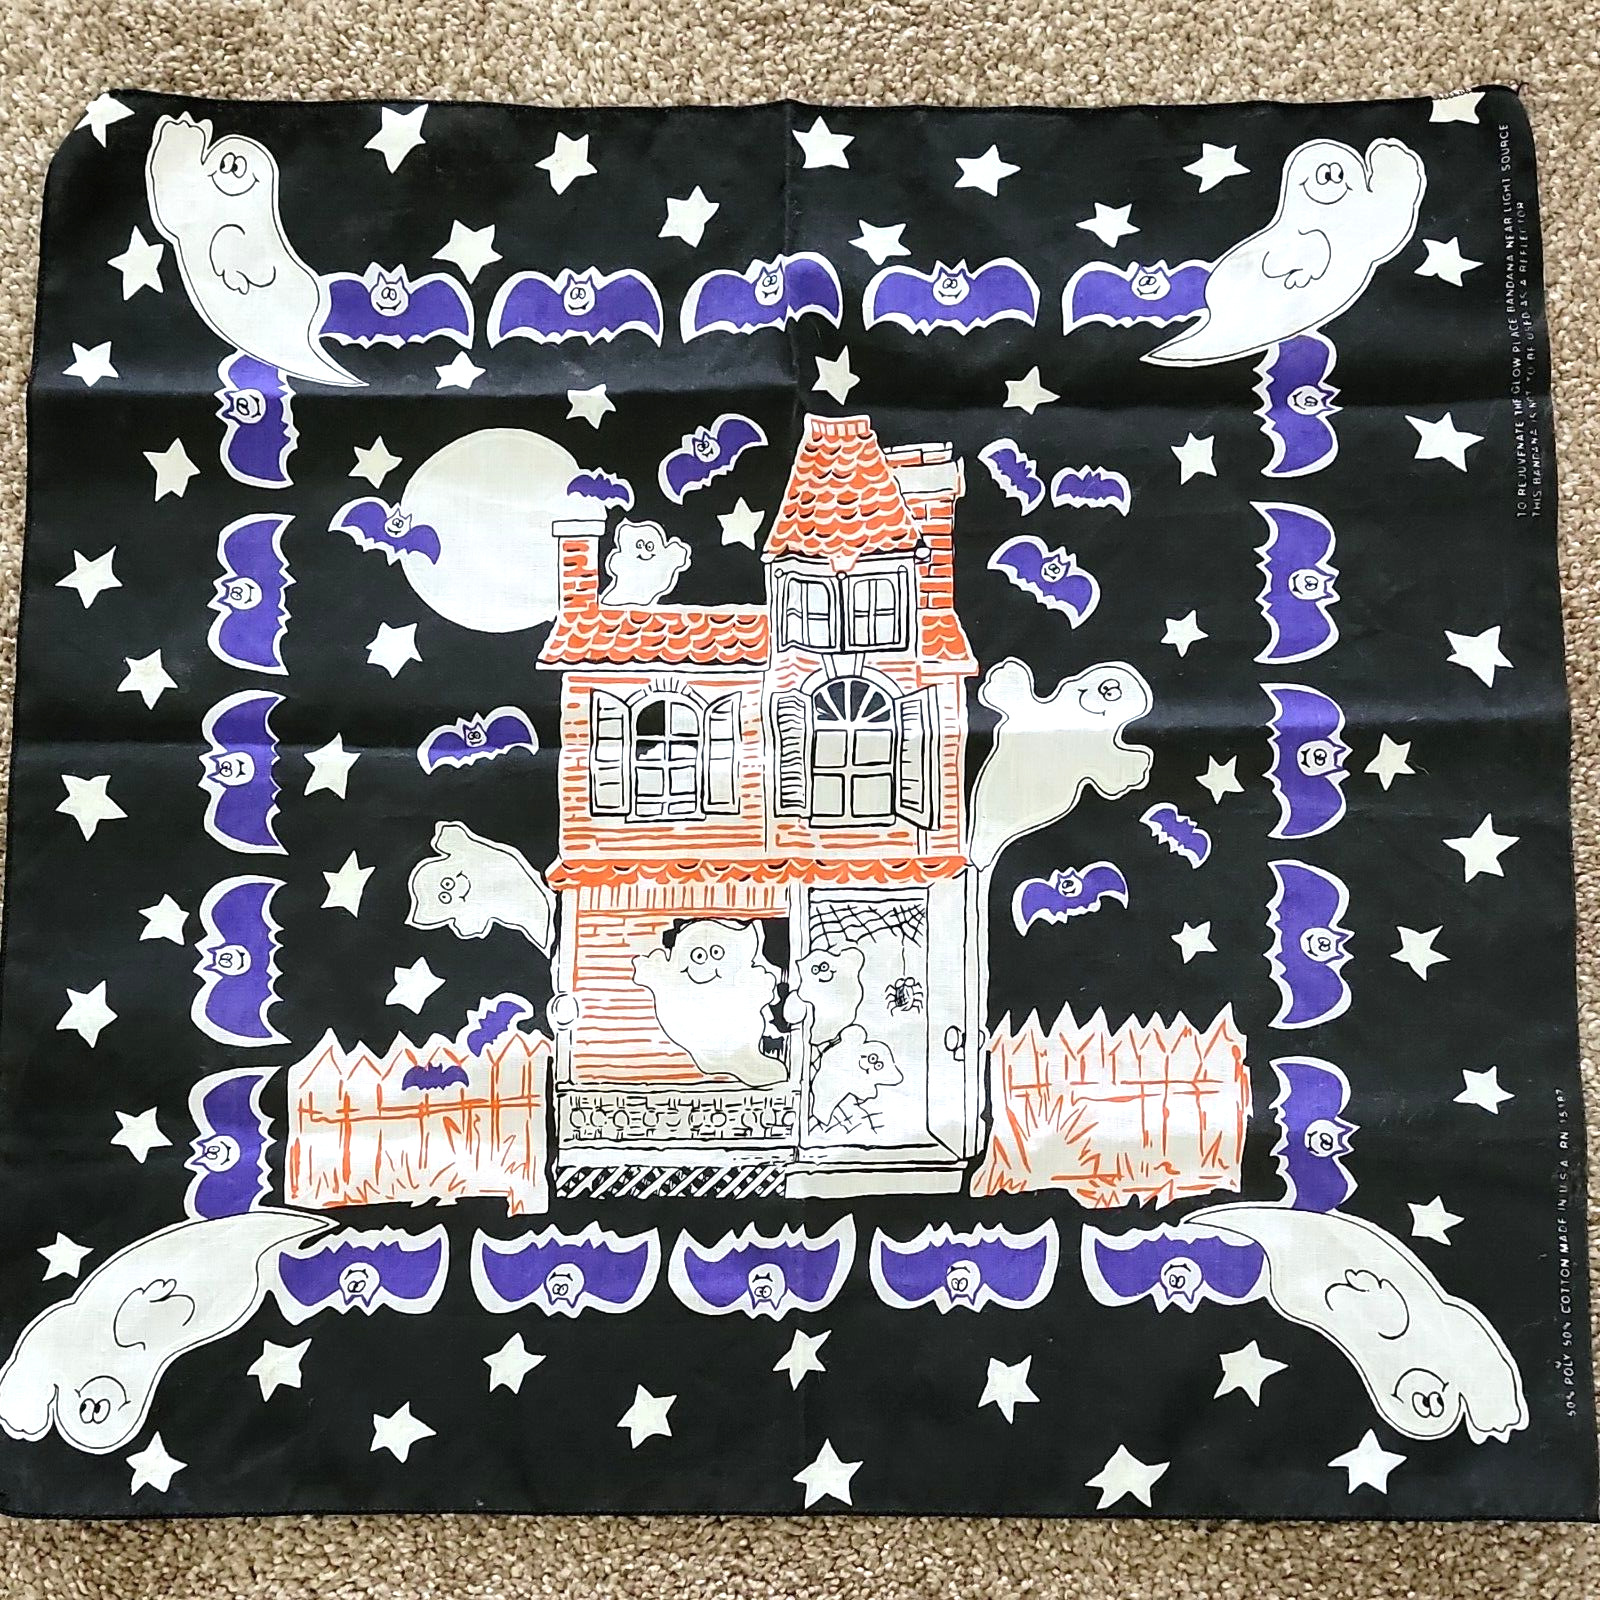 Vintage Haunted House Glow In The Dark Bandana Made in USA